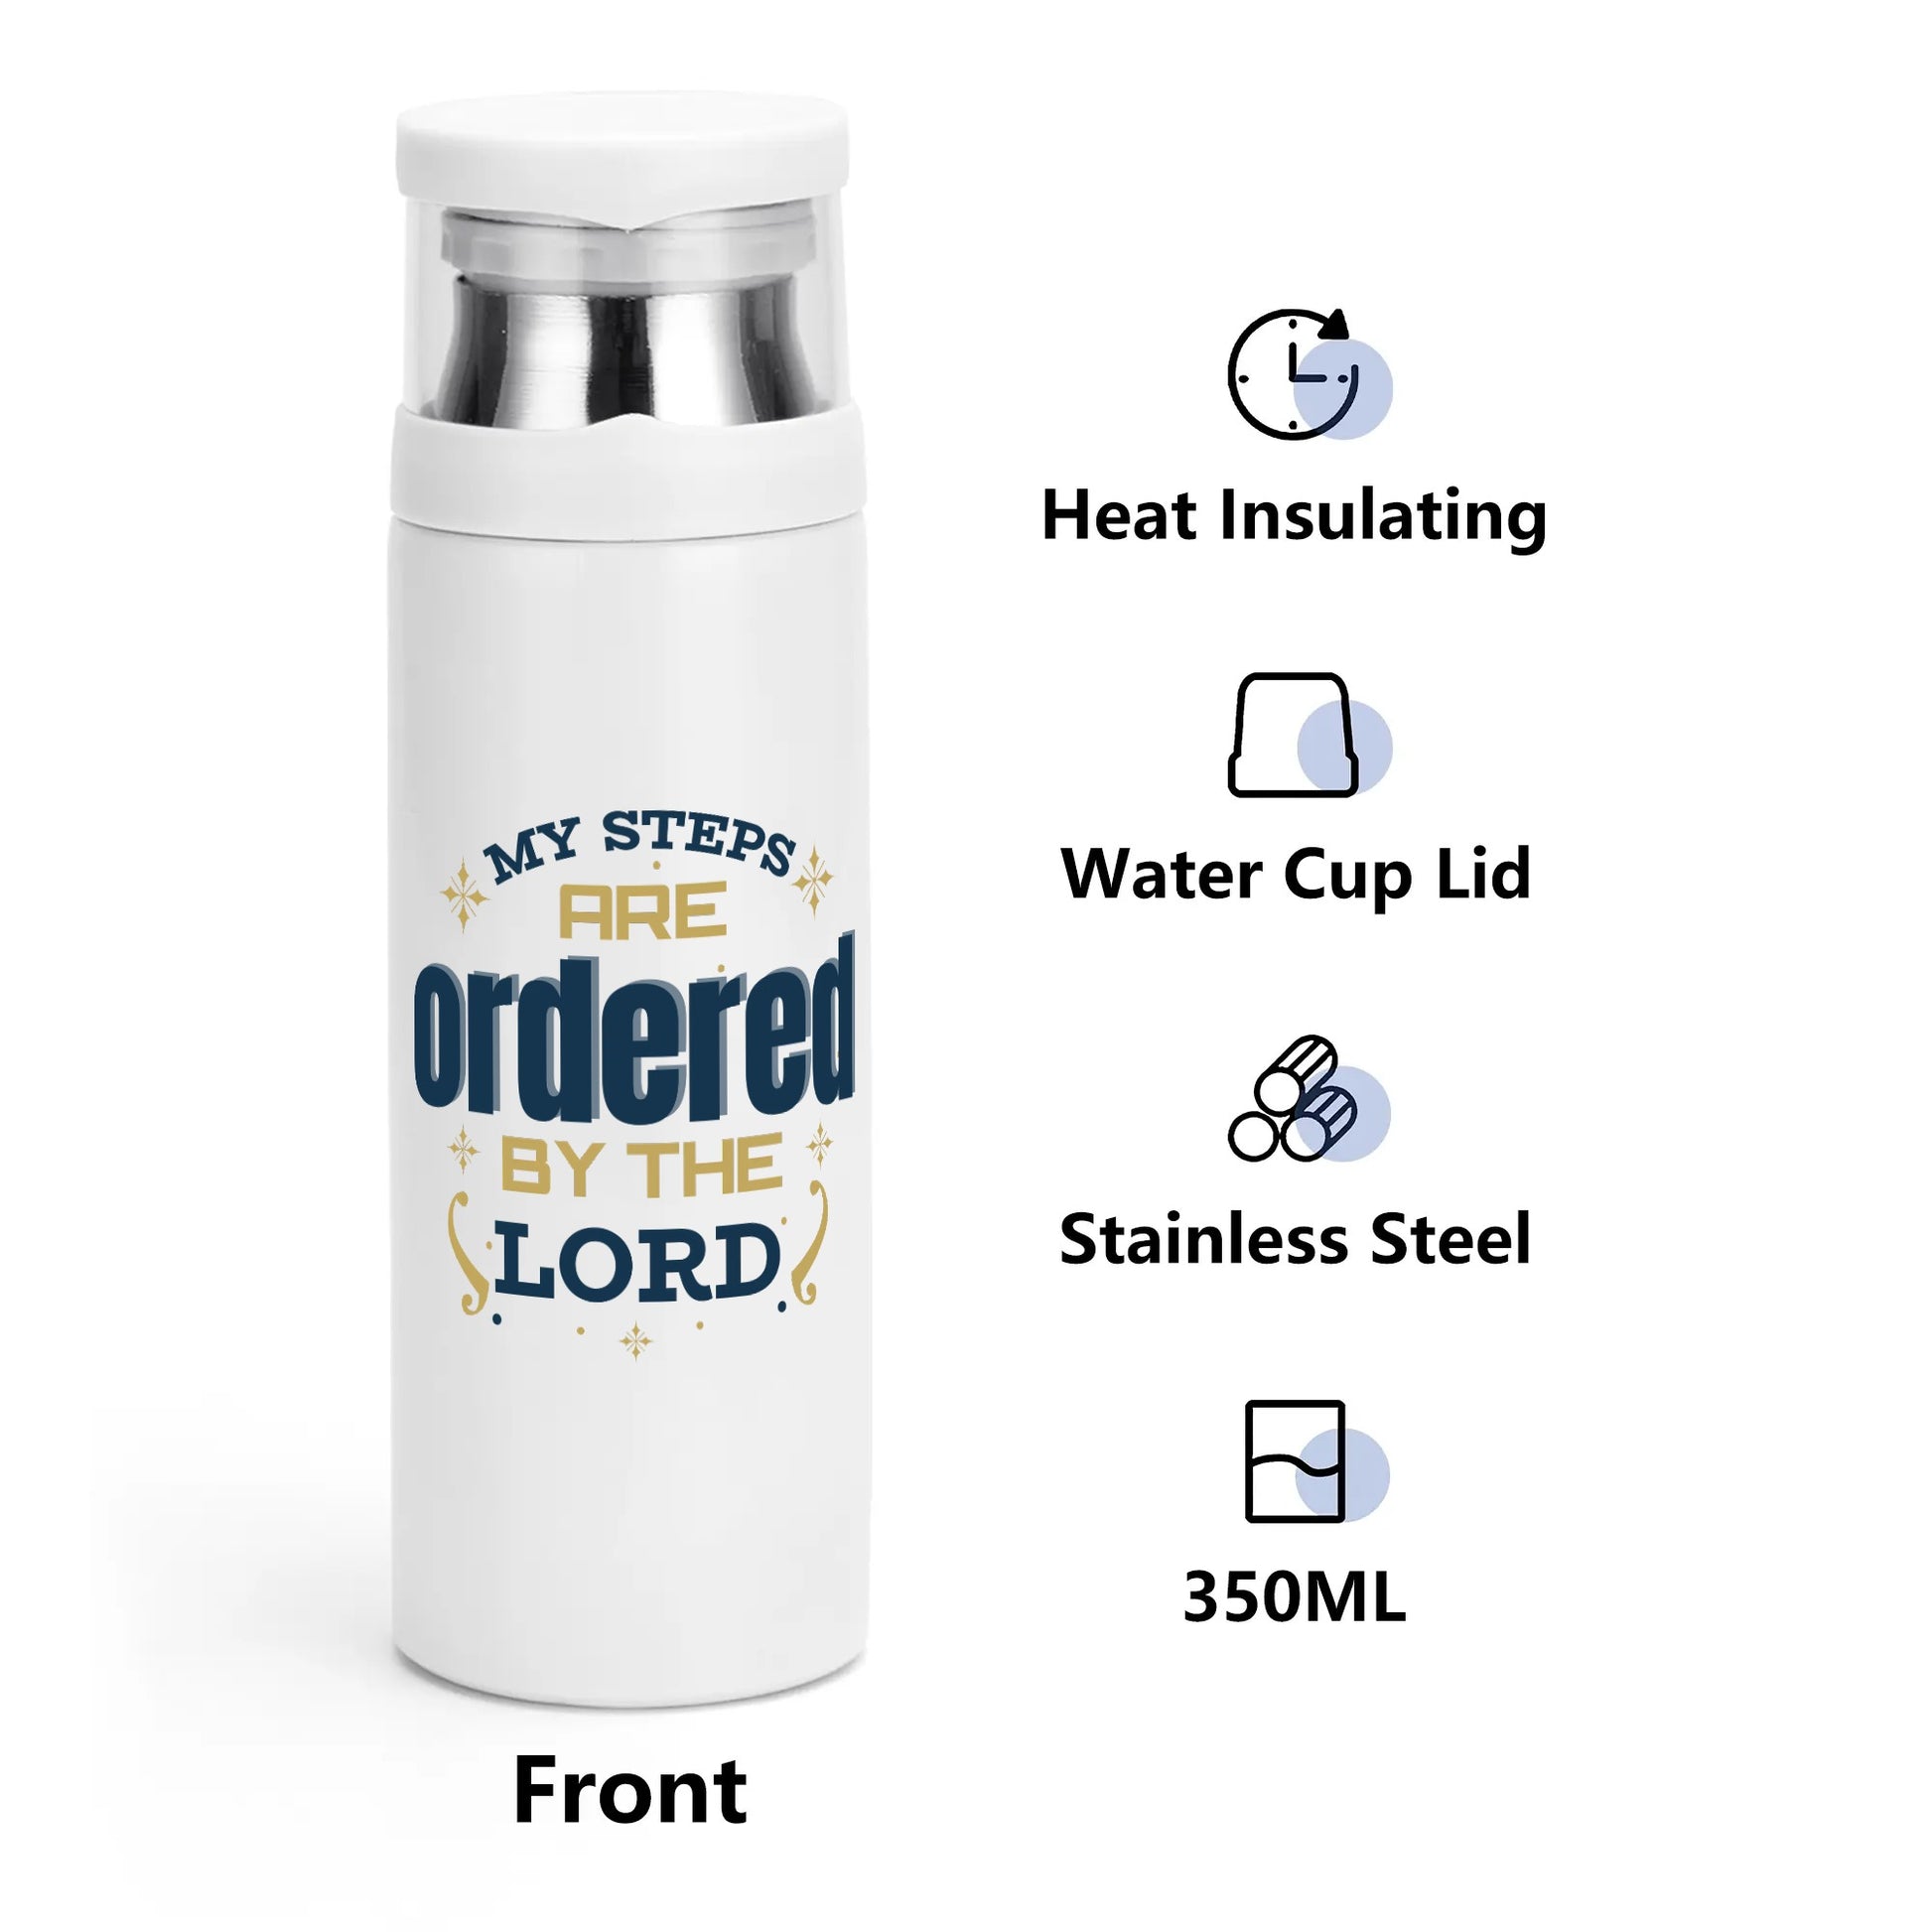 My Steps Are Ordered By The Lord Vacuum Bottle with Cup popcustoms